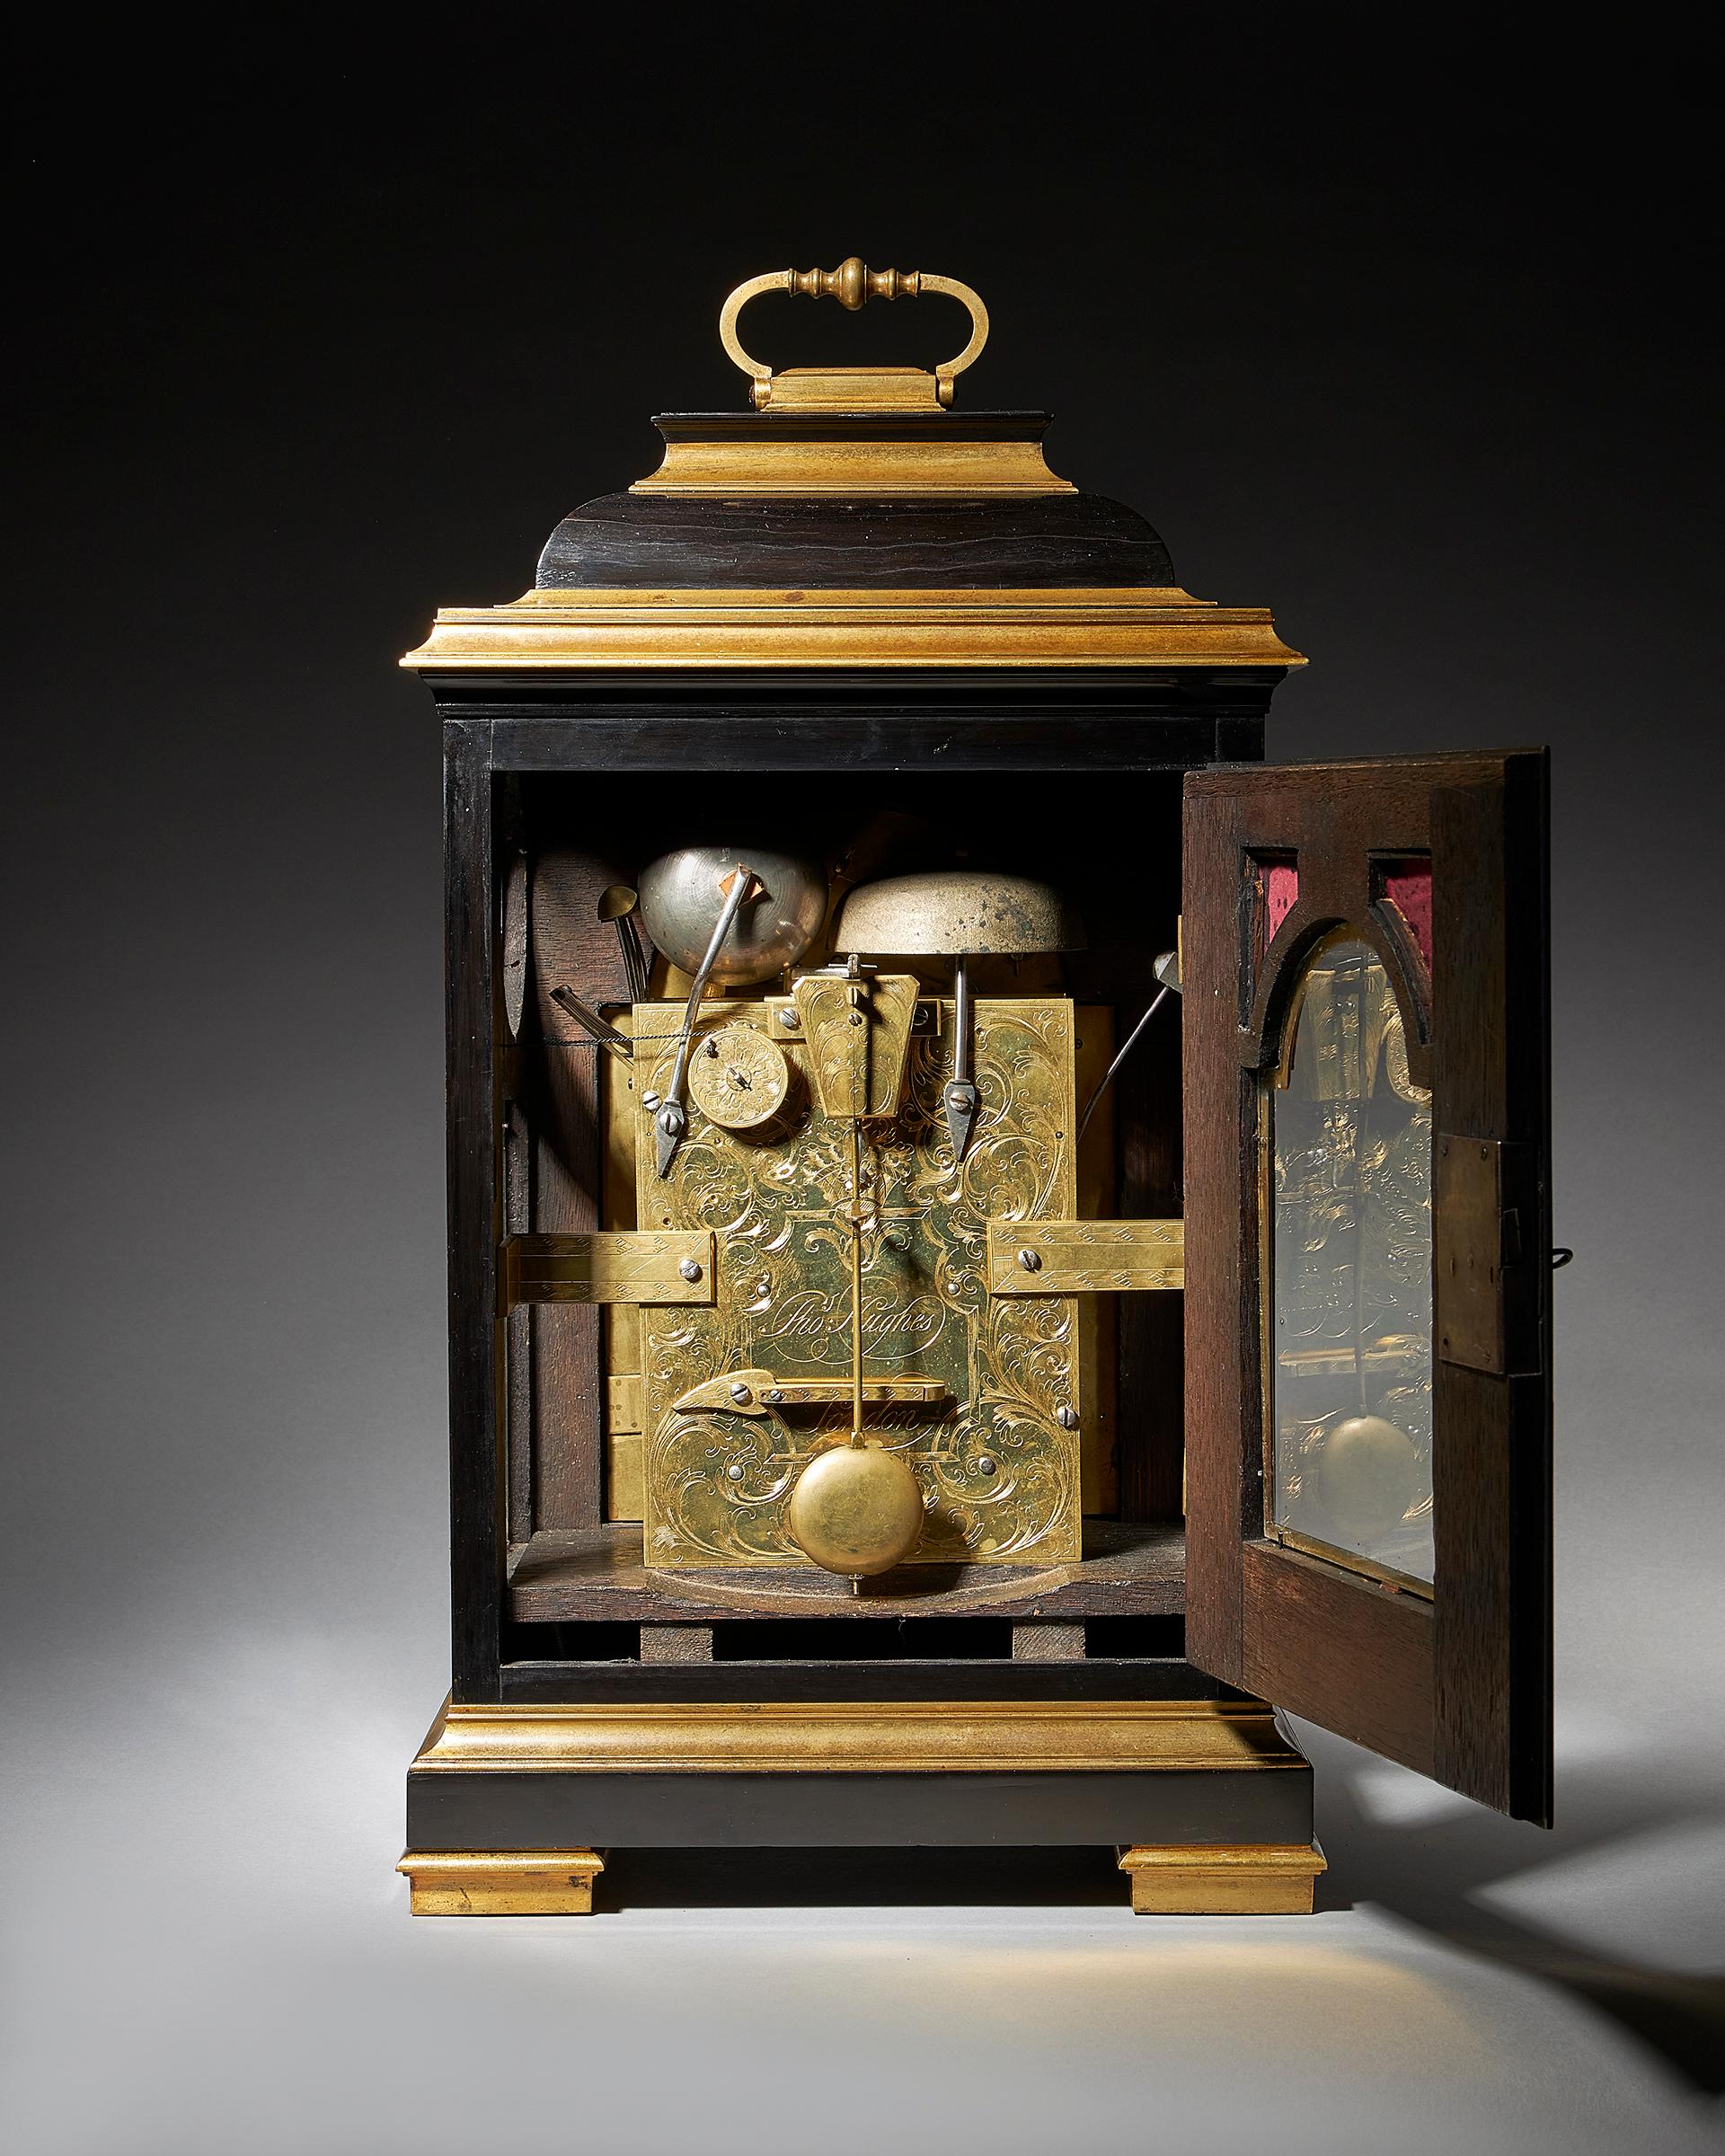 By Thomas Hughes, London

The ebony-veneered case has an inverted bell top, a design which became popular in the early Georgian period (from 1715 onwards). The case is adorned with brass mouldings and rests on shaped brass block feet. It is